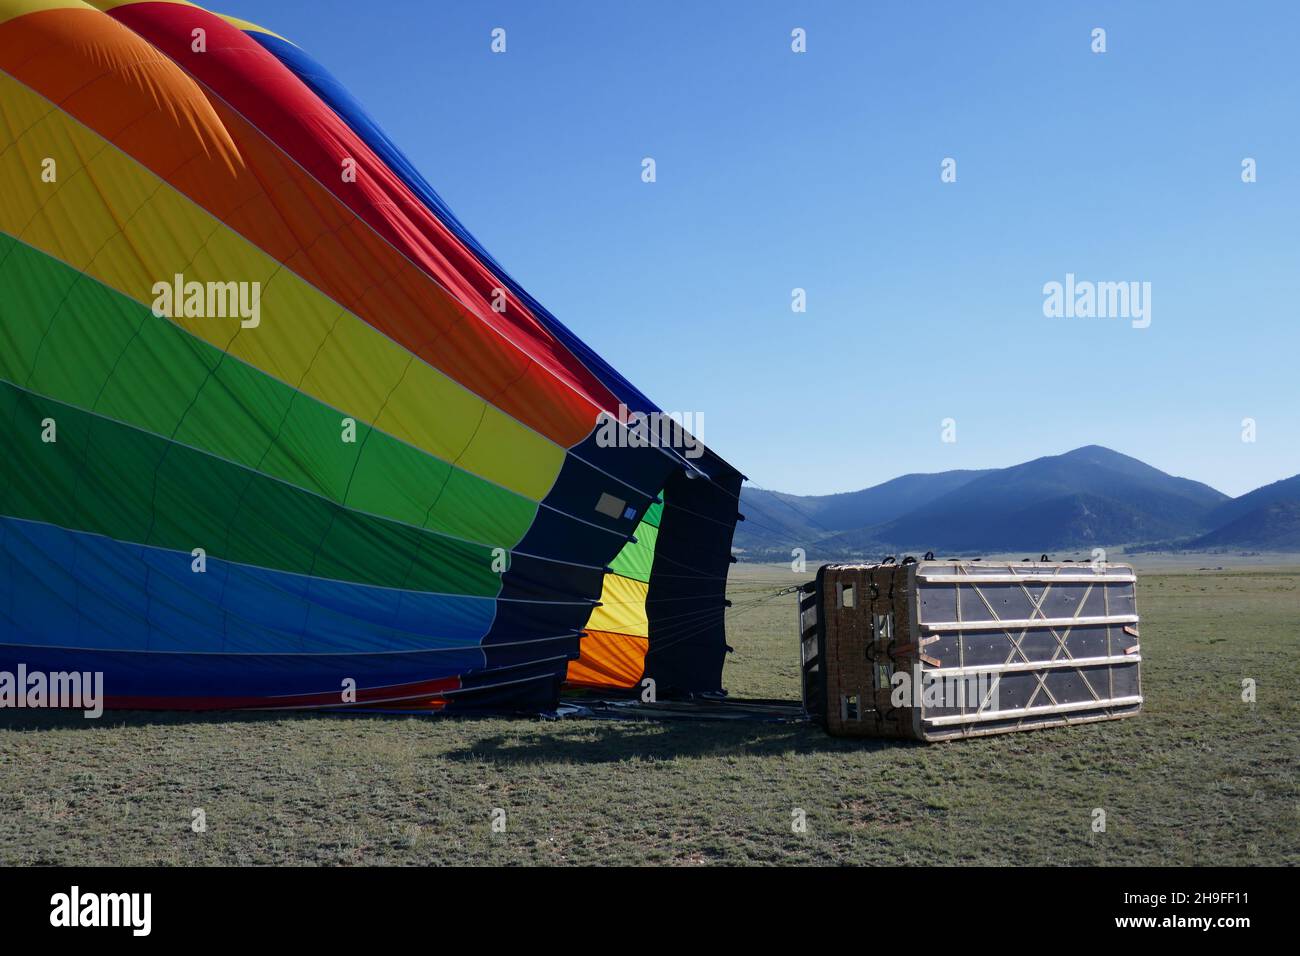 Side view of partially deflated hot air balloon with attached passenger basket Stock Photo